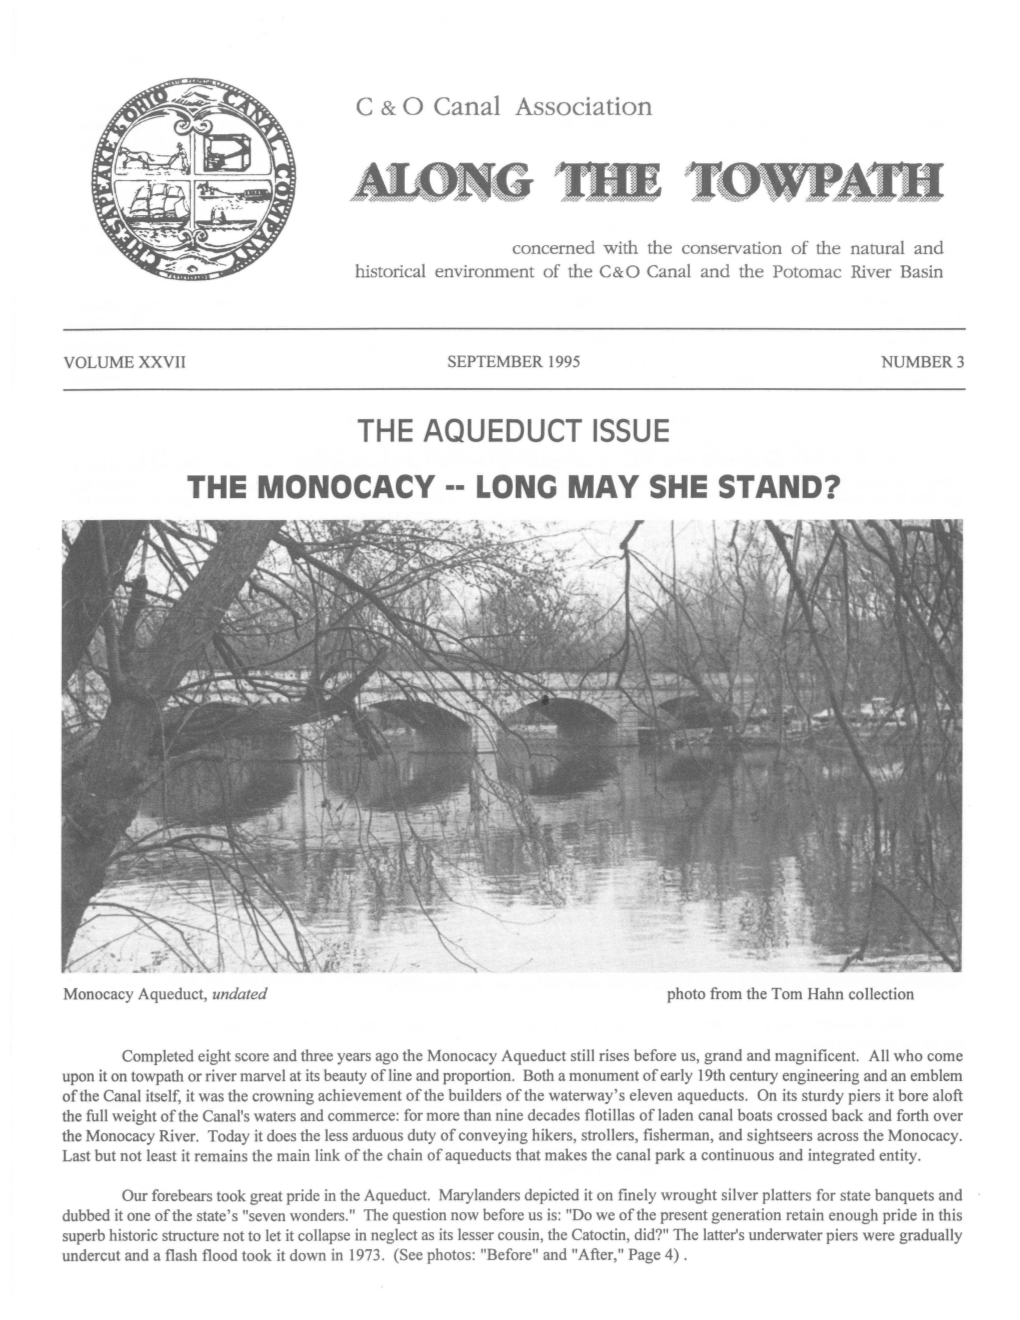 The Aqueduct Issue the Monocacy·· Lonc May She Stand?